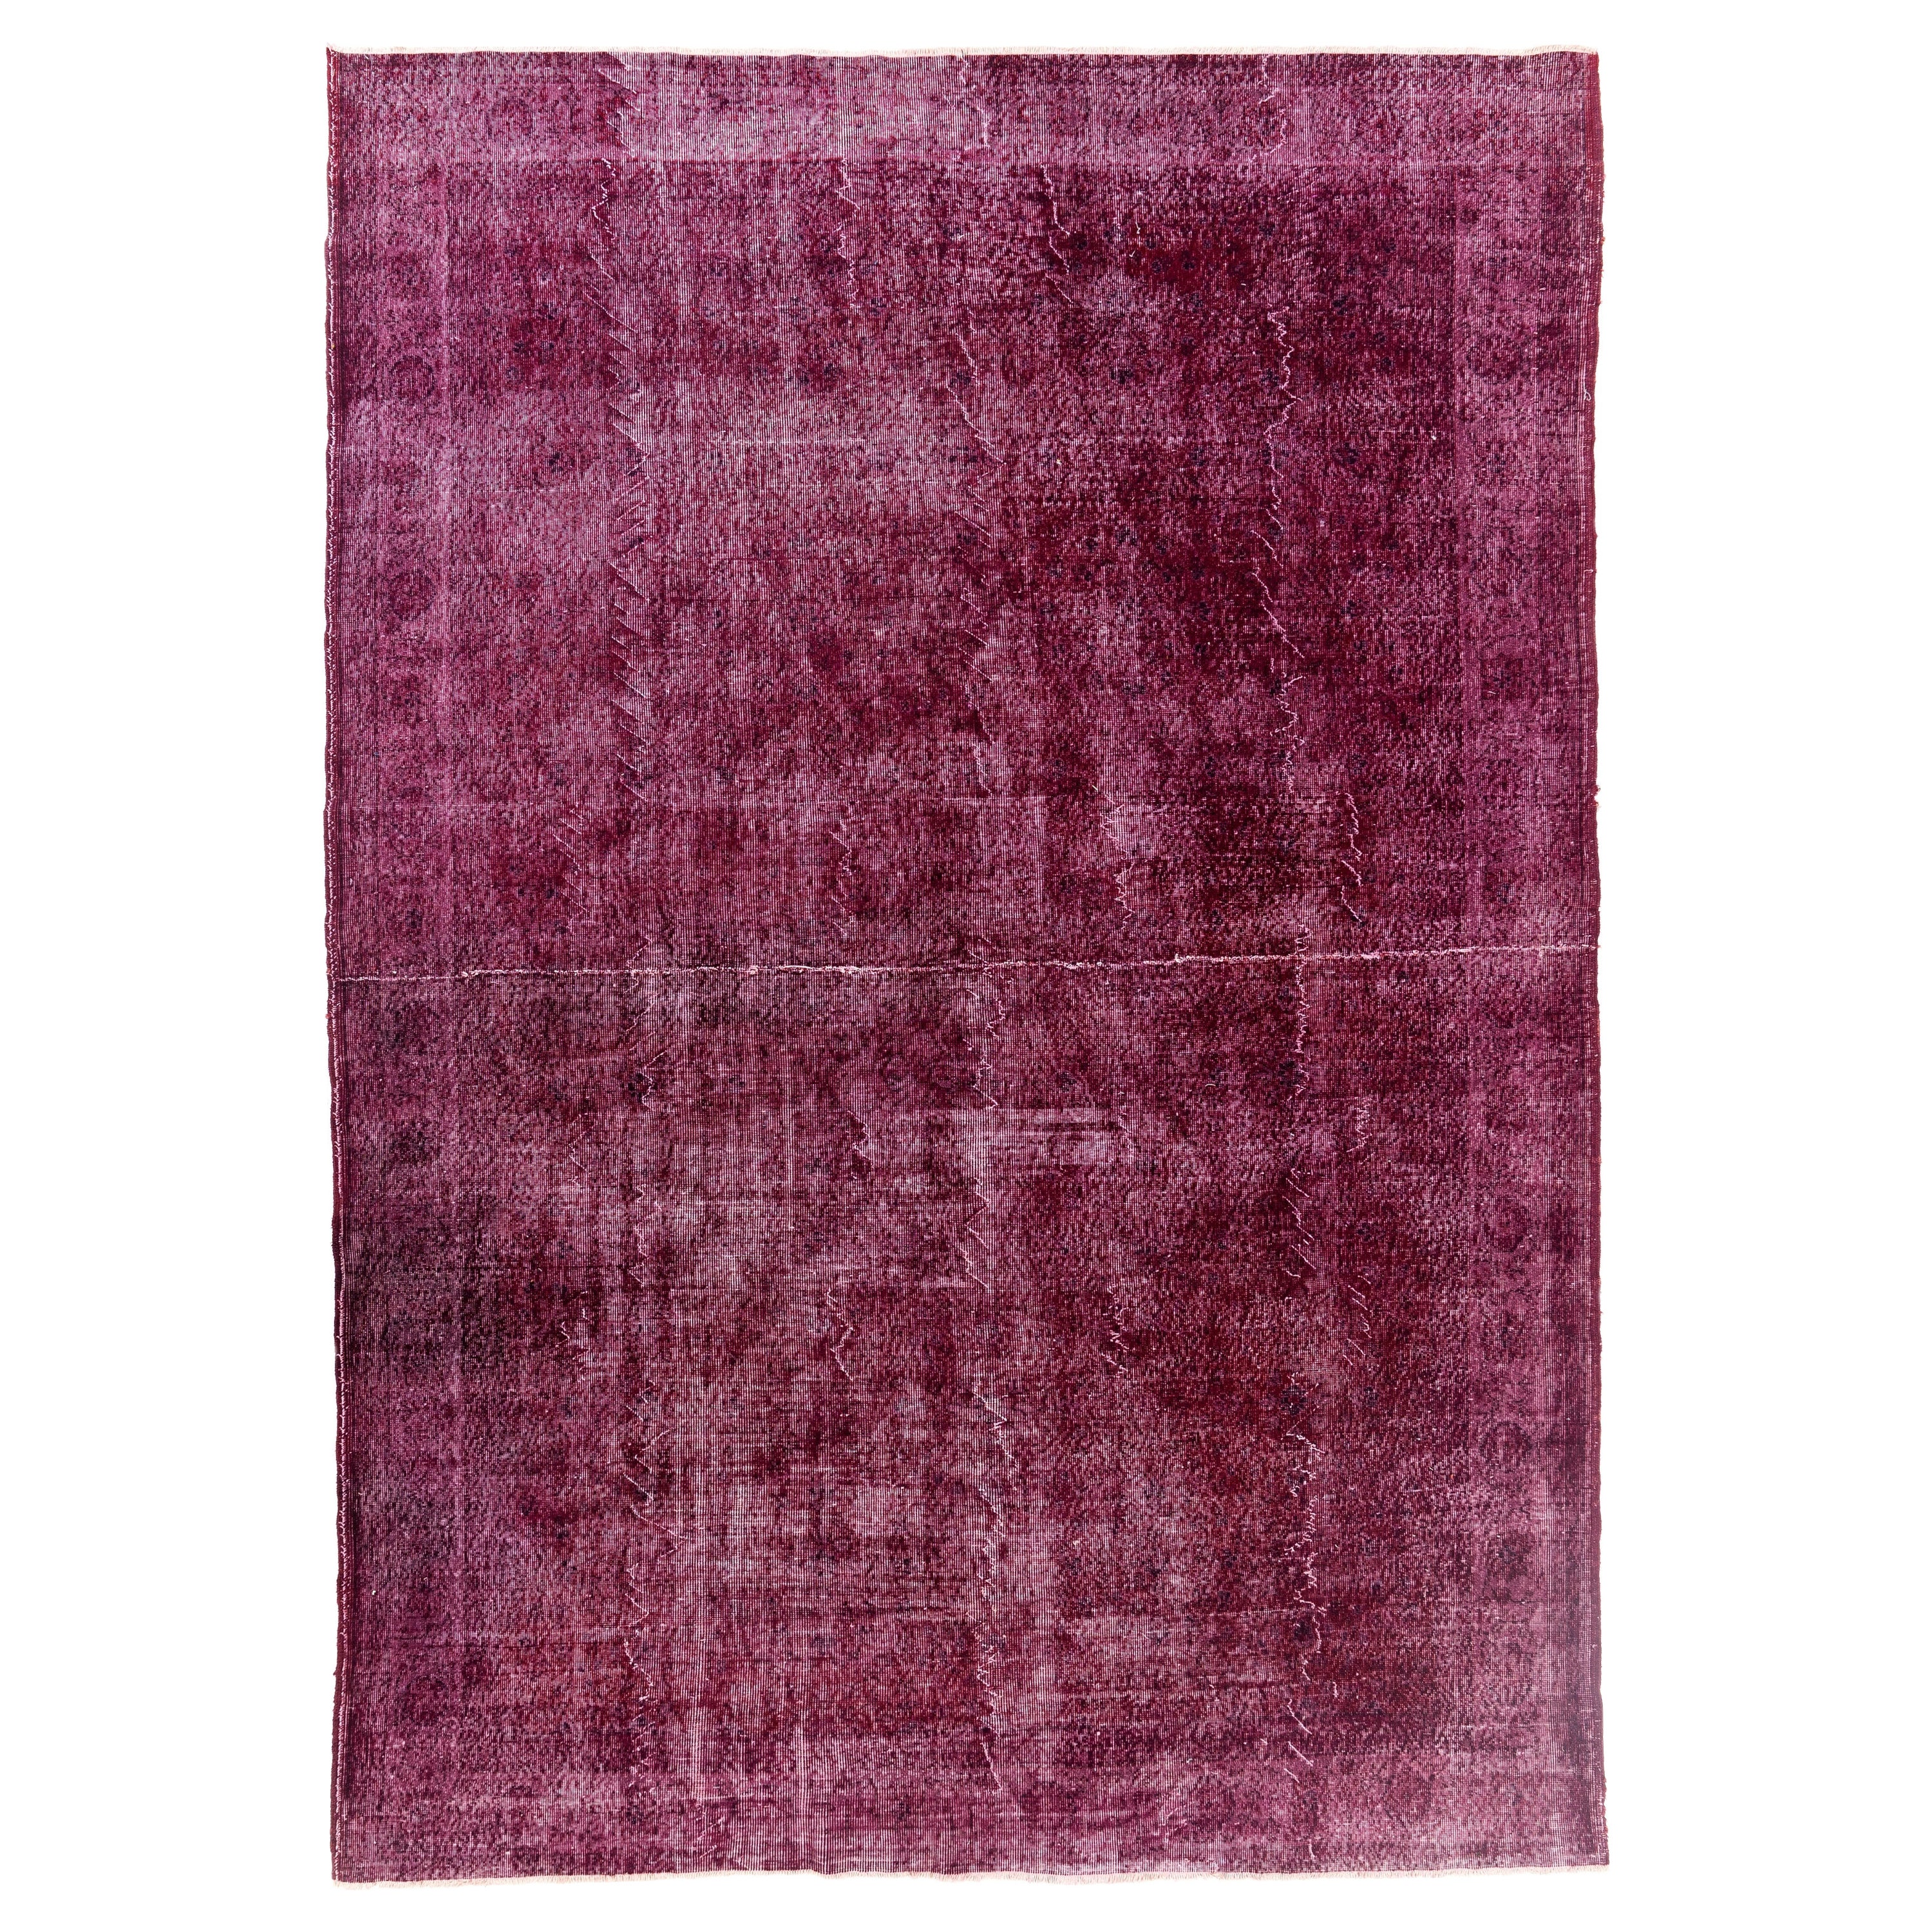 9x13 Ft Handmade Turkish Large Rug in Burgundy Red. Great 4 Modern Interiors For Sale